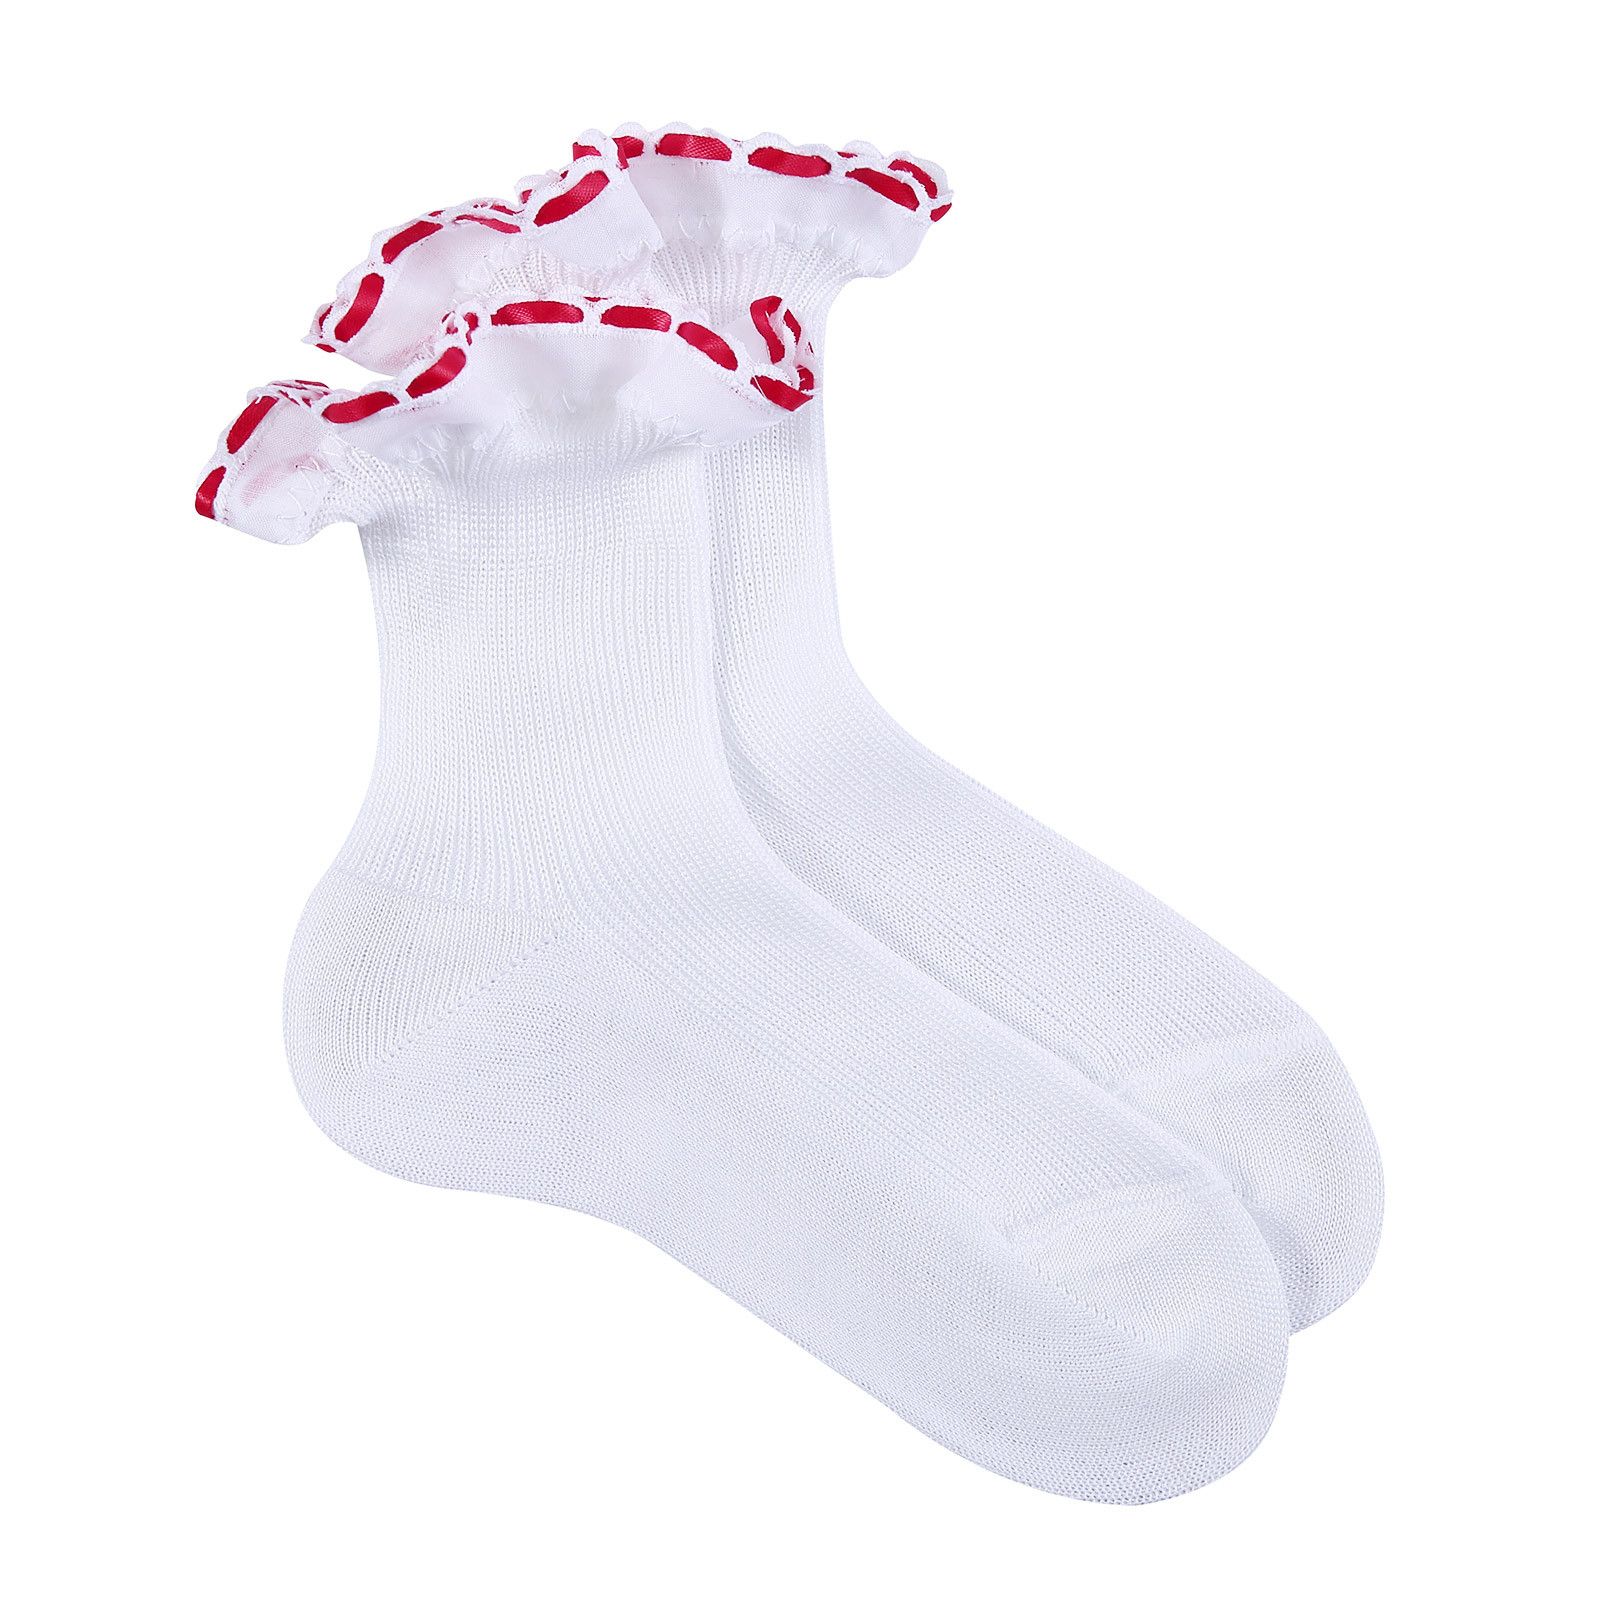 Girls White Cotton Short Socks With Red Strap Ankle - CÉMAROSE | Children's Fashion Store